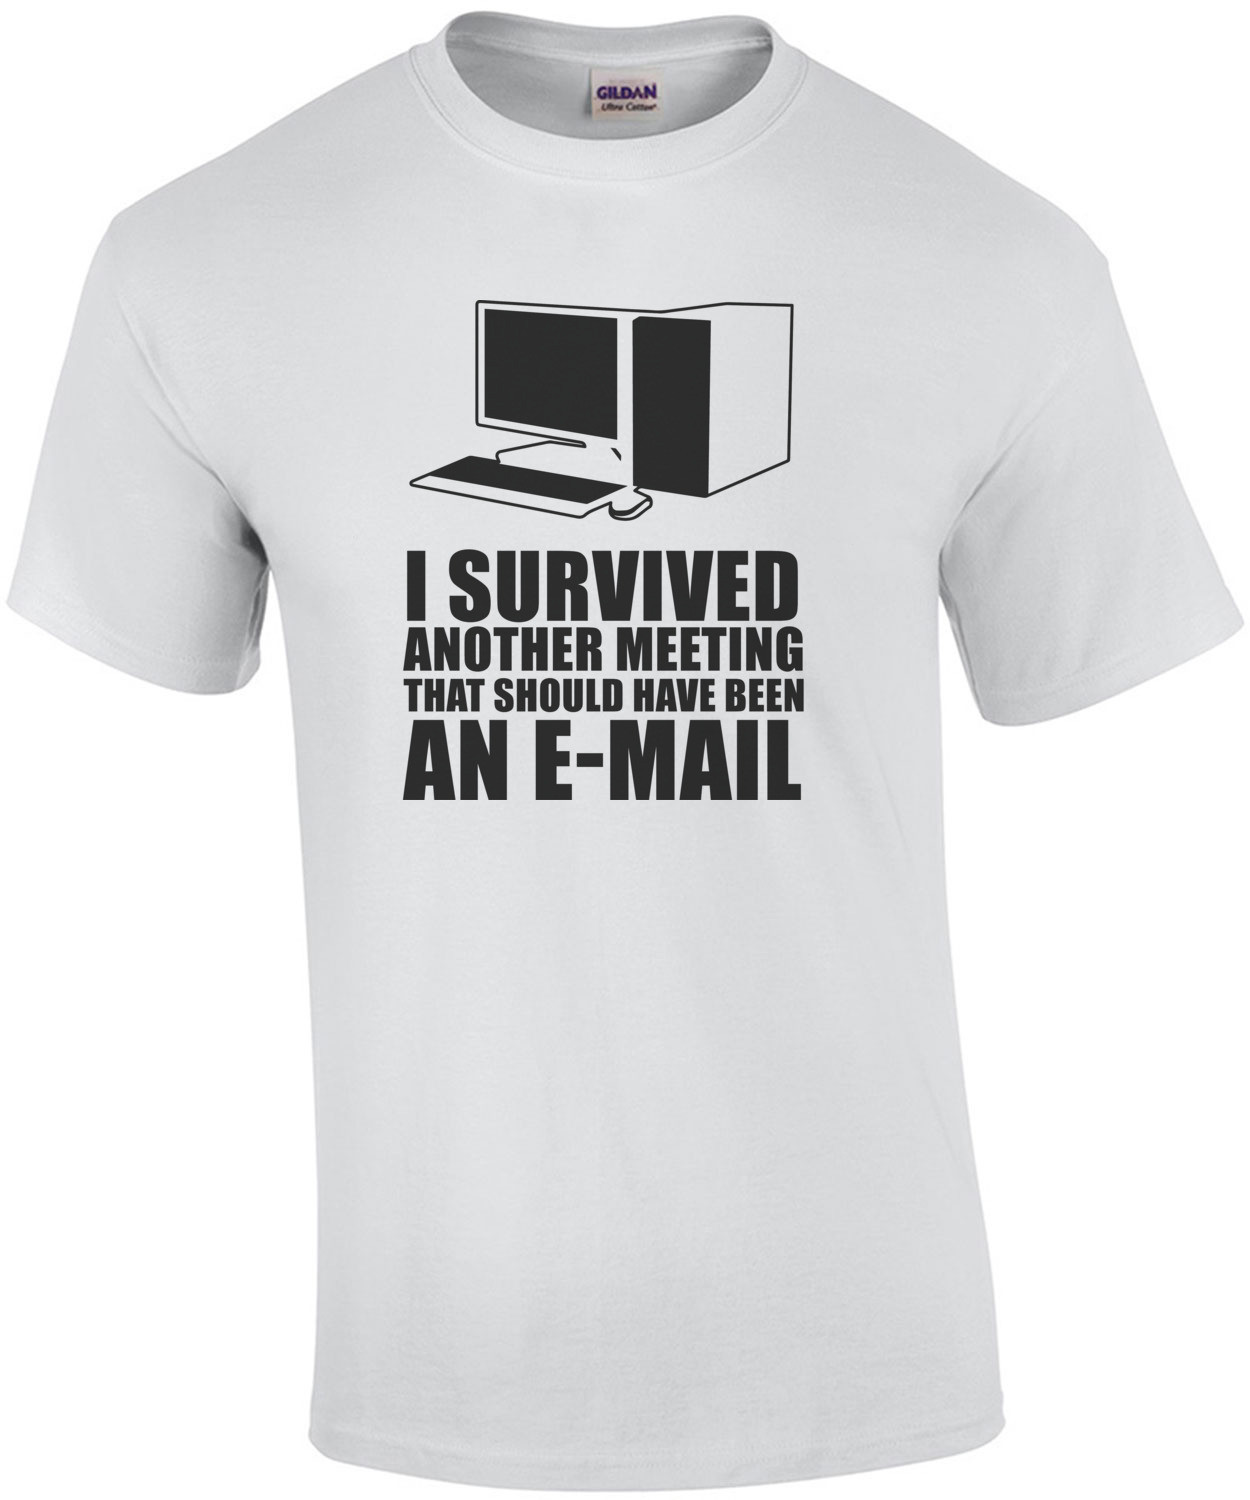 I survived another meeting that should have been an e-mail